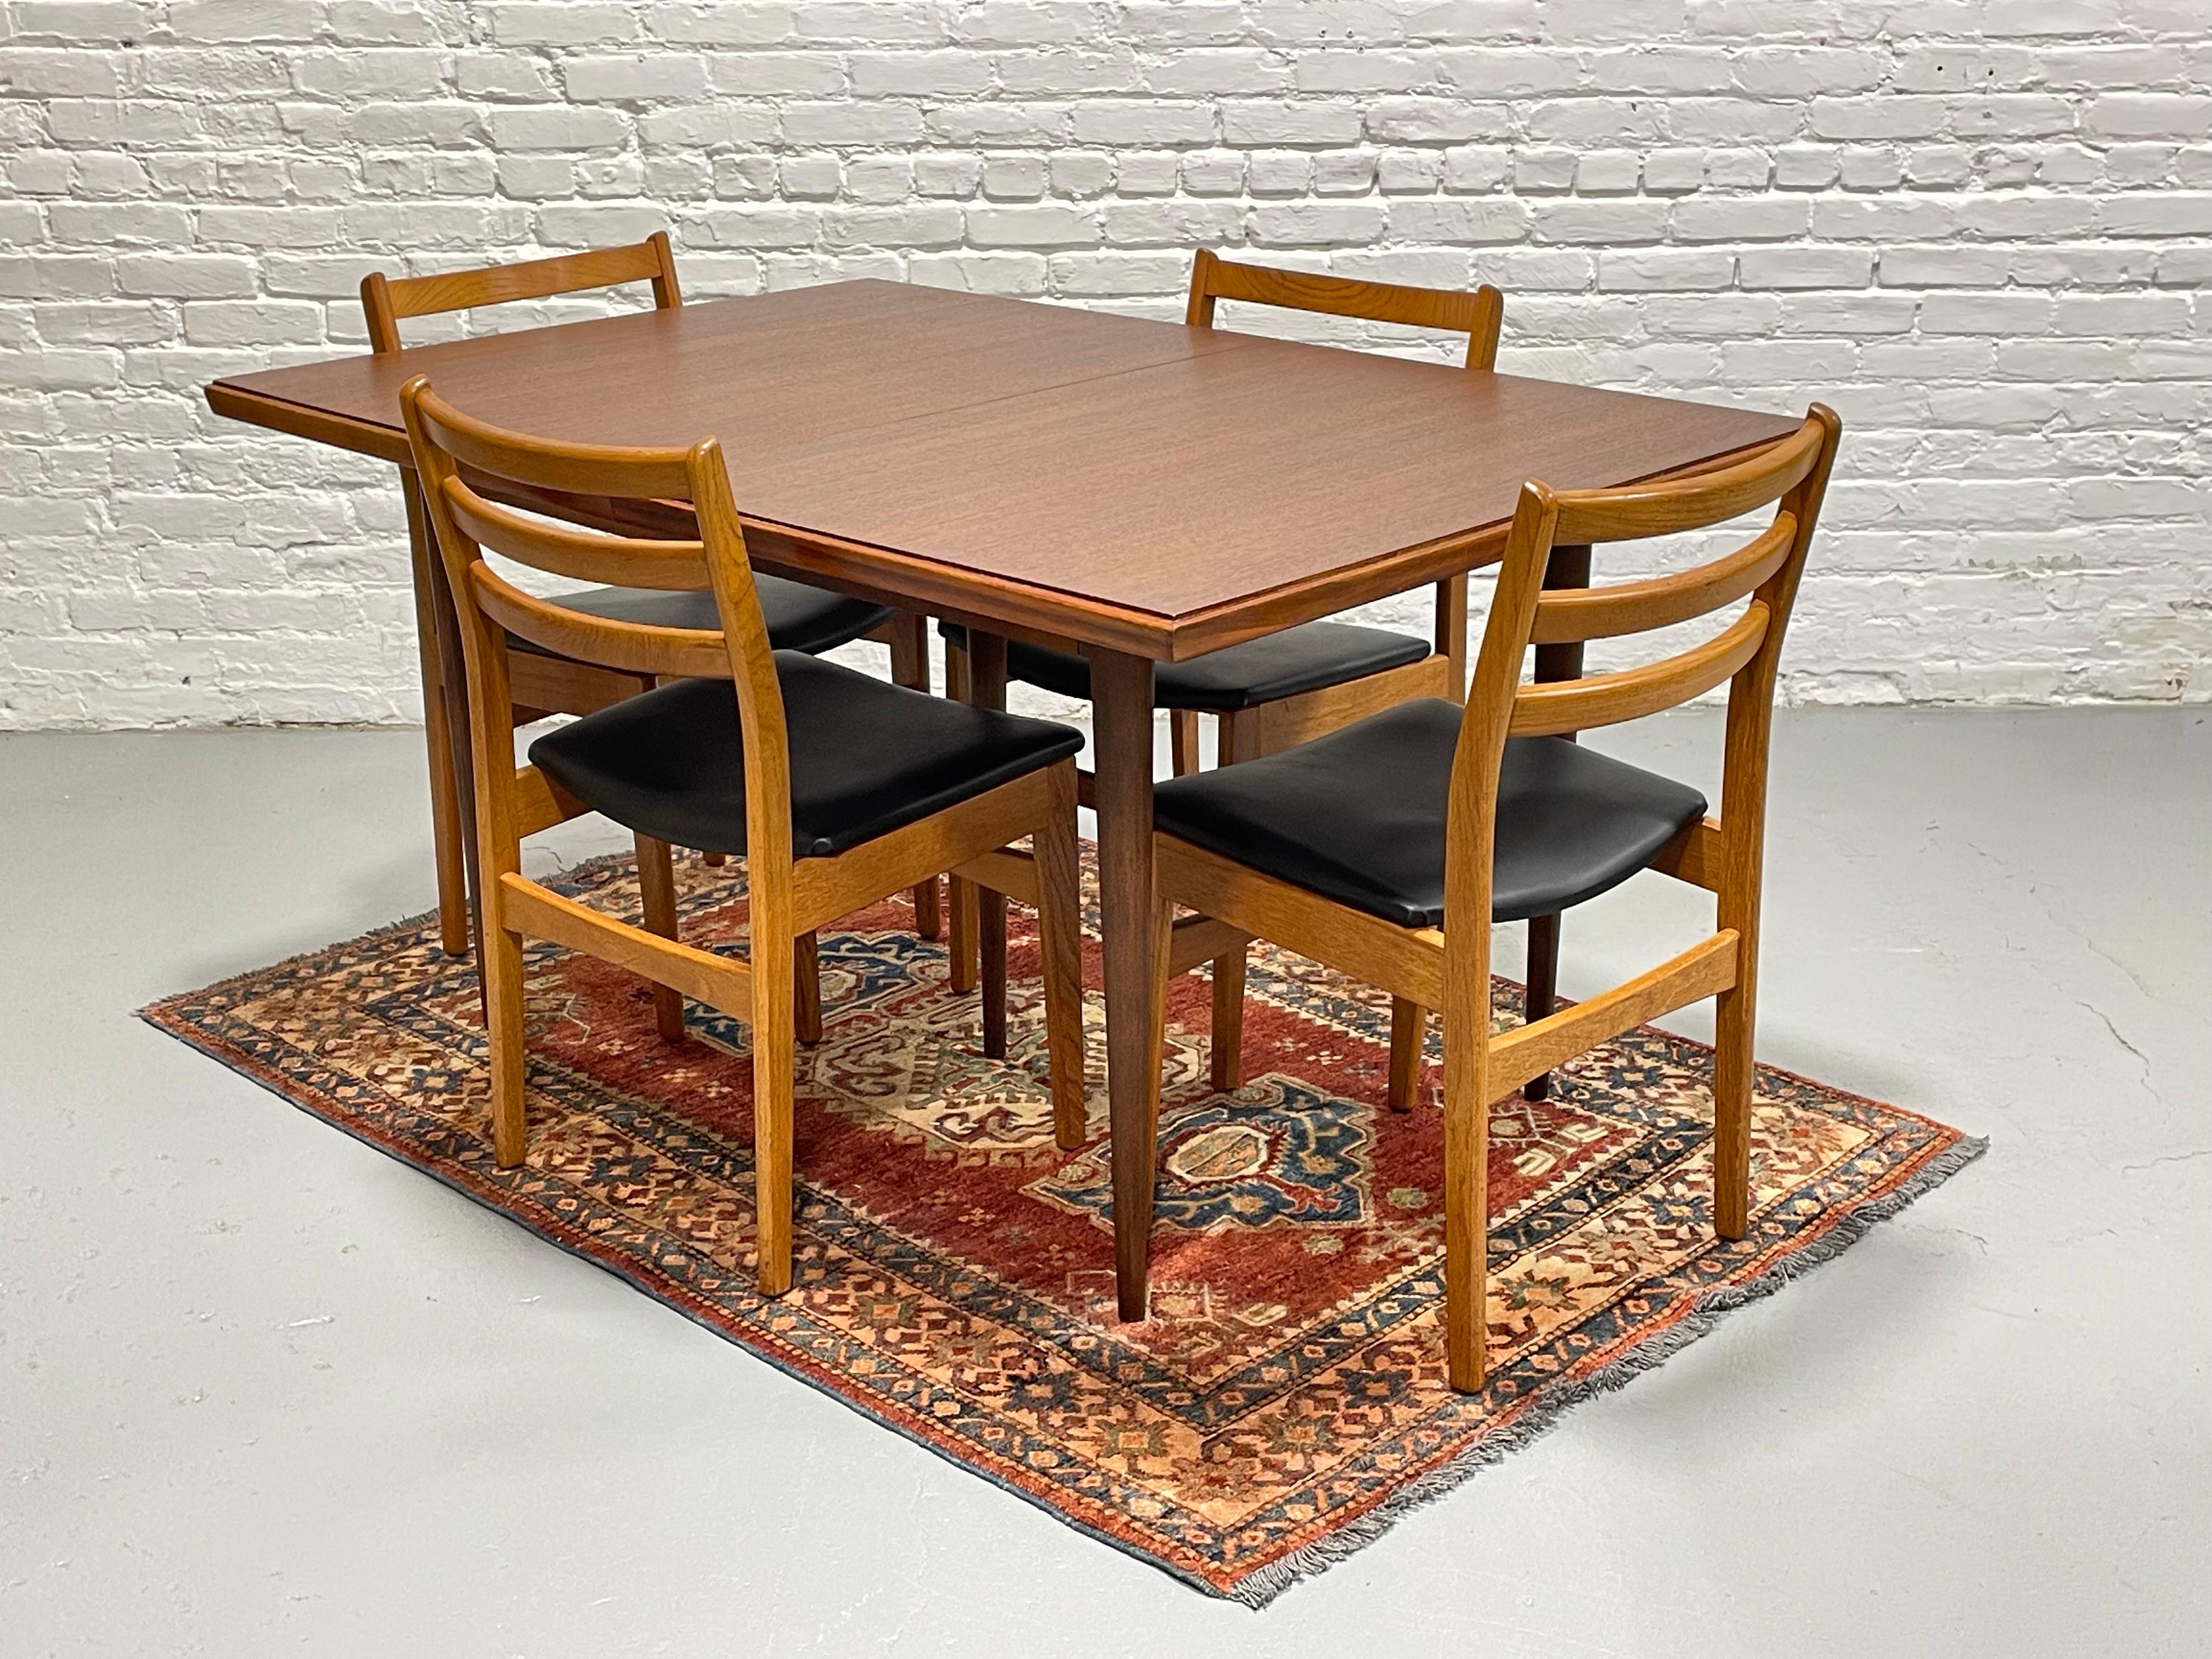 Perfectly sized Mid Century Modern WALNUT DINING TABLE, c. 1960's. Comfortably seats 4-8 guests yet won't overwhelm a room. Solidly built from walnut wood with long tapered legs and a freshly refinished tabletop.  The table includes an expansion